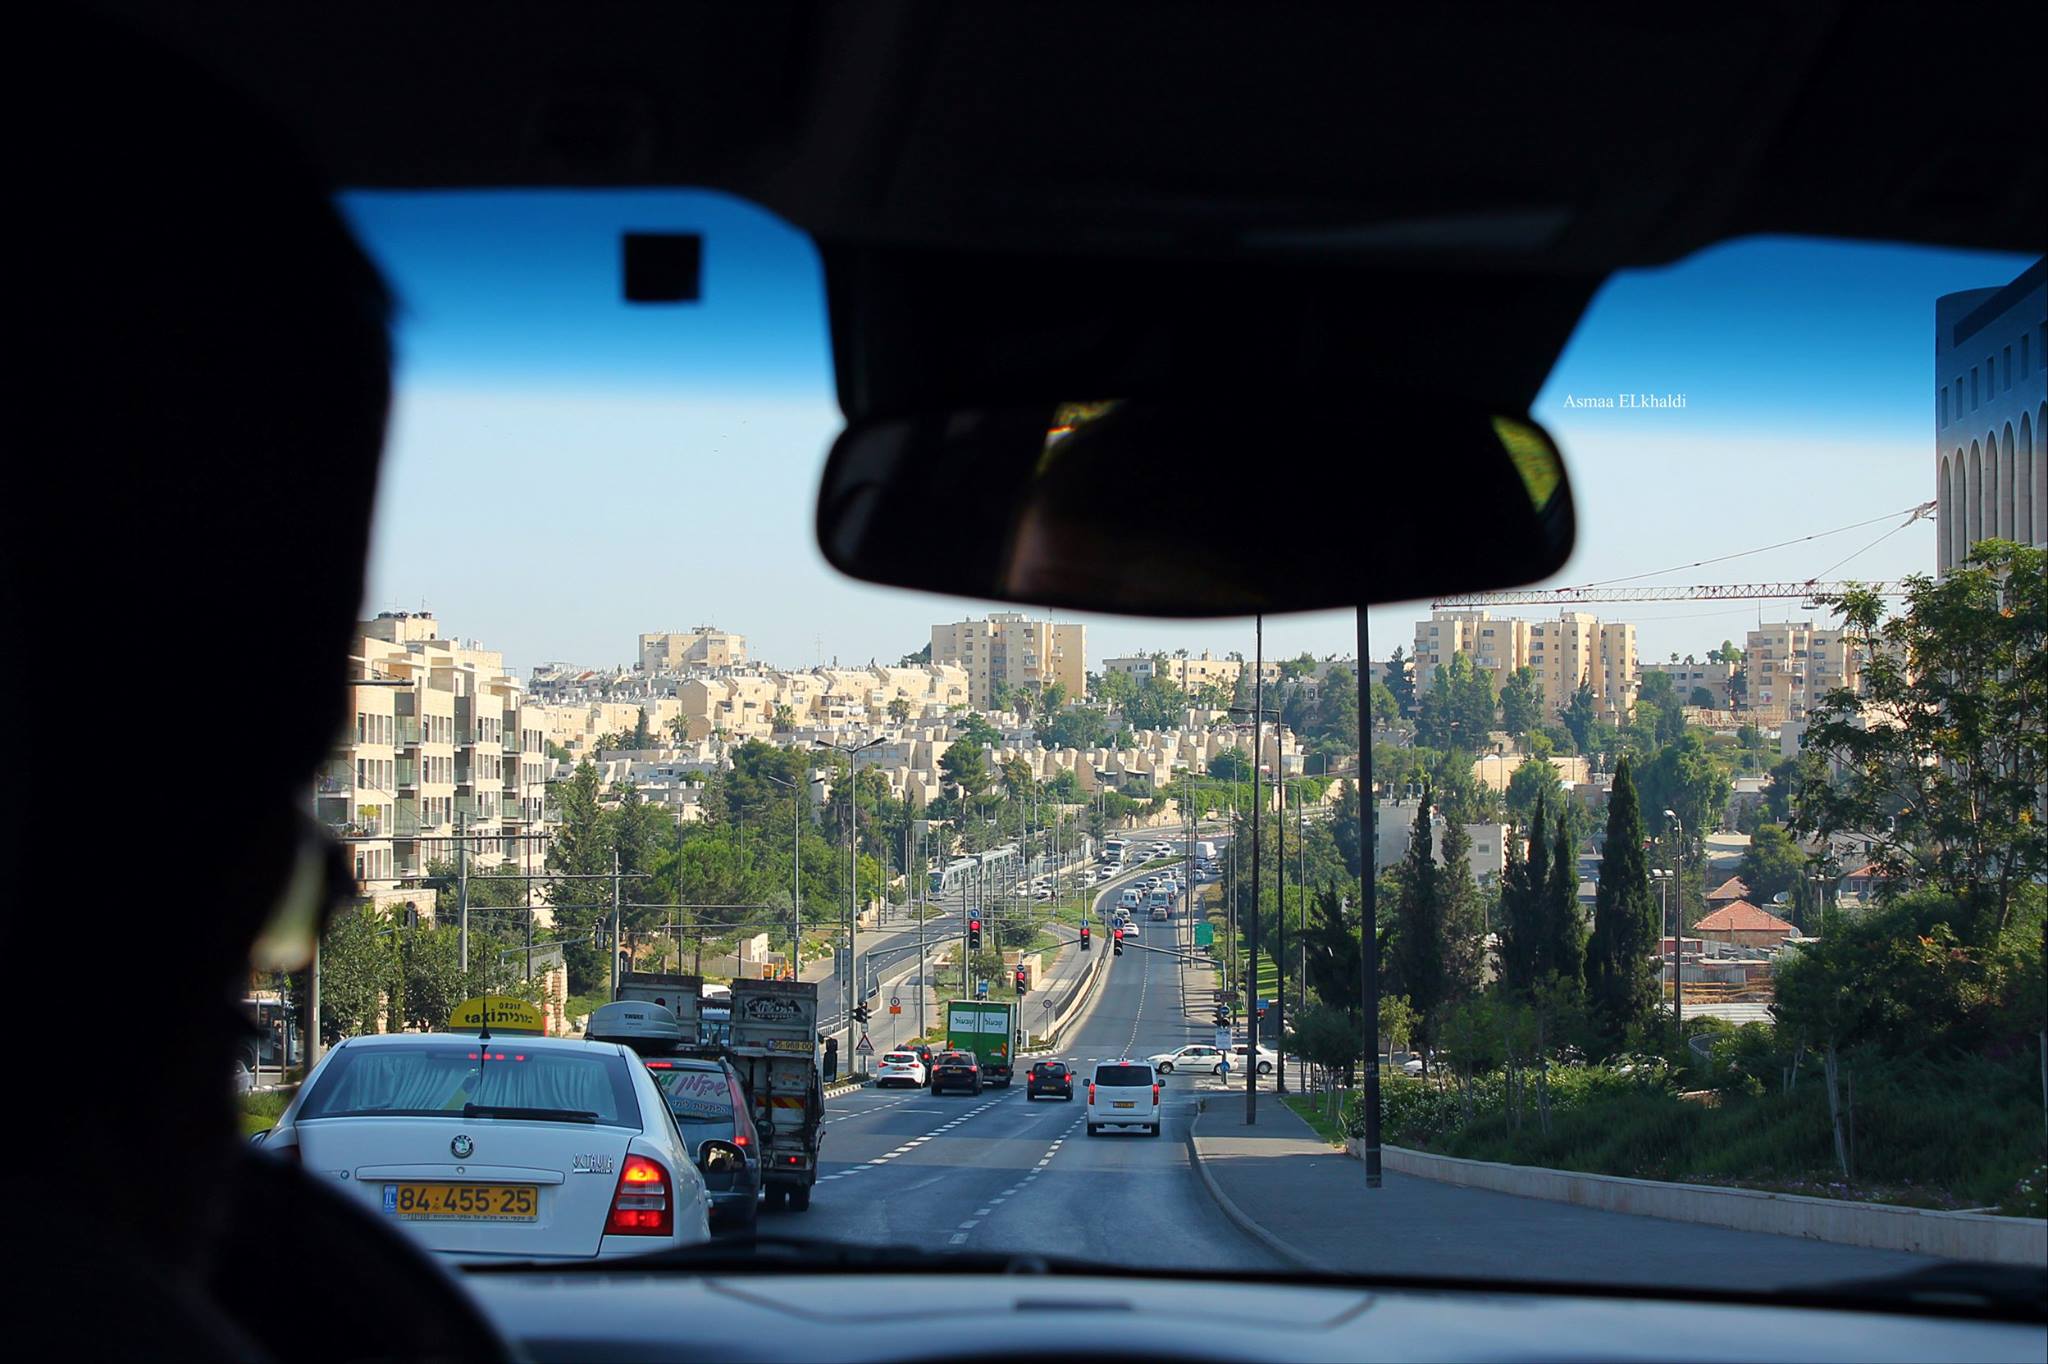 The streets of Israel